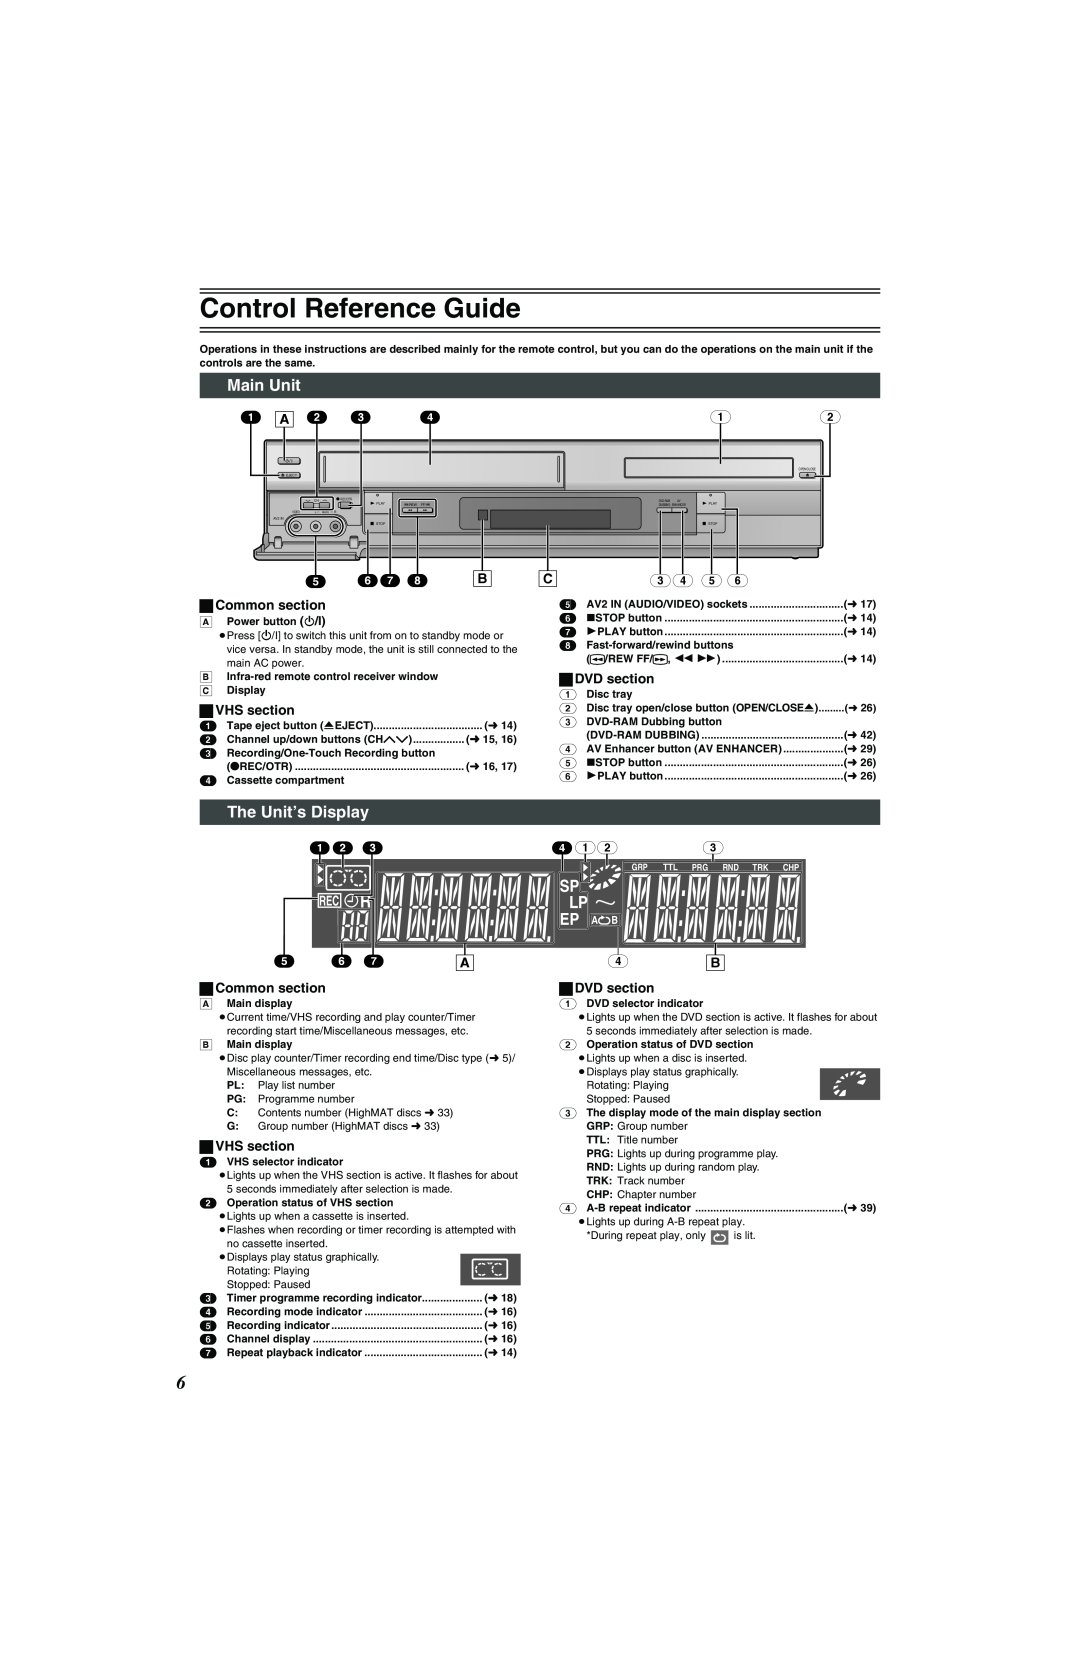 Panasonic NV-VP32 Series Control Reference Guide, Main Unit, The Unit’s Display, Sp Slp Ep Ab, ª Common section, Recr 